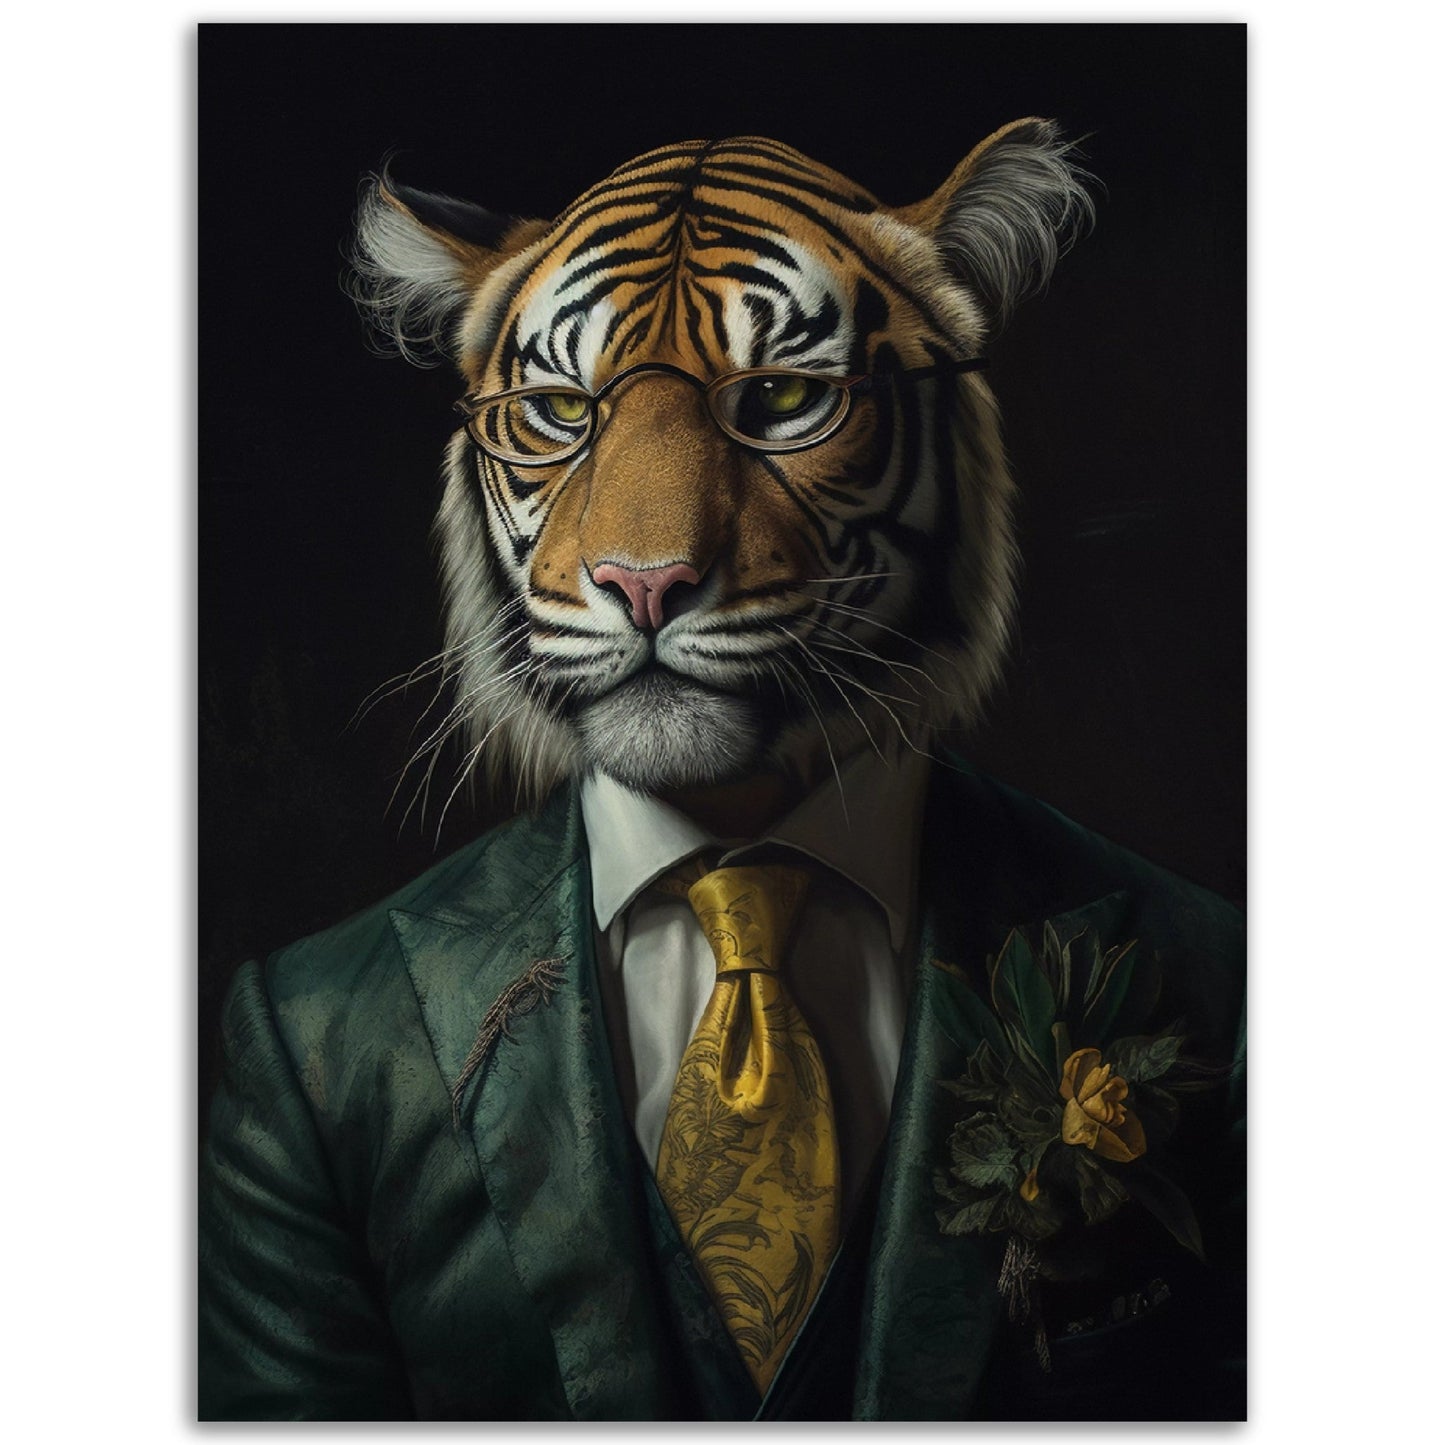 A high-quality Well Dressed Tiger, perfect for room decor or wall art.